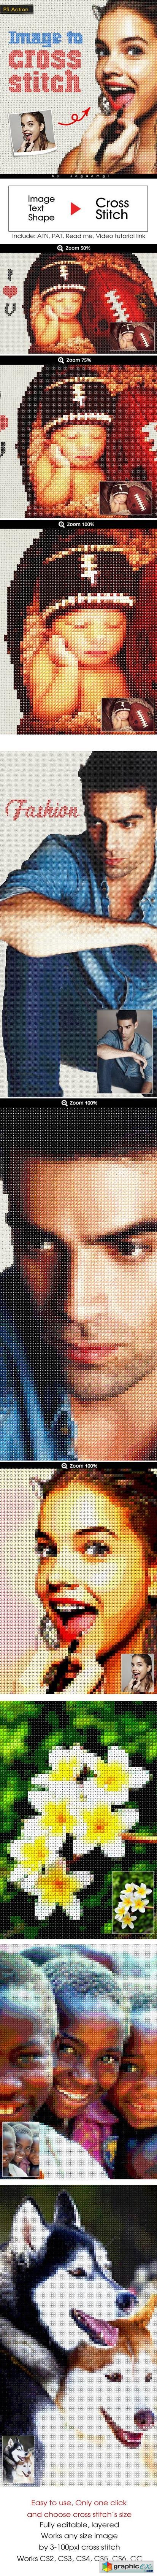 Image To Cross Stitch PS Action